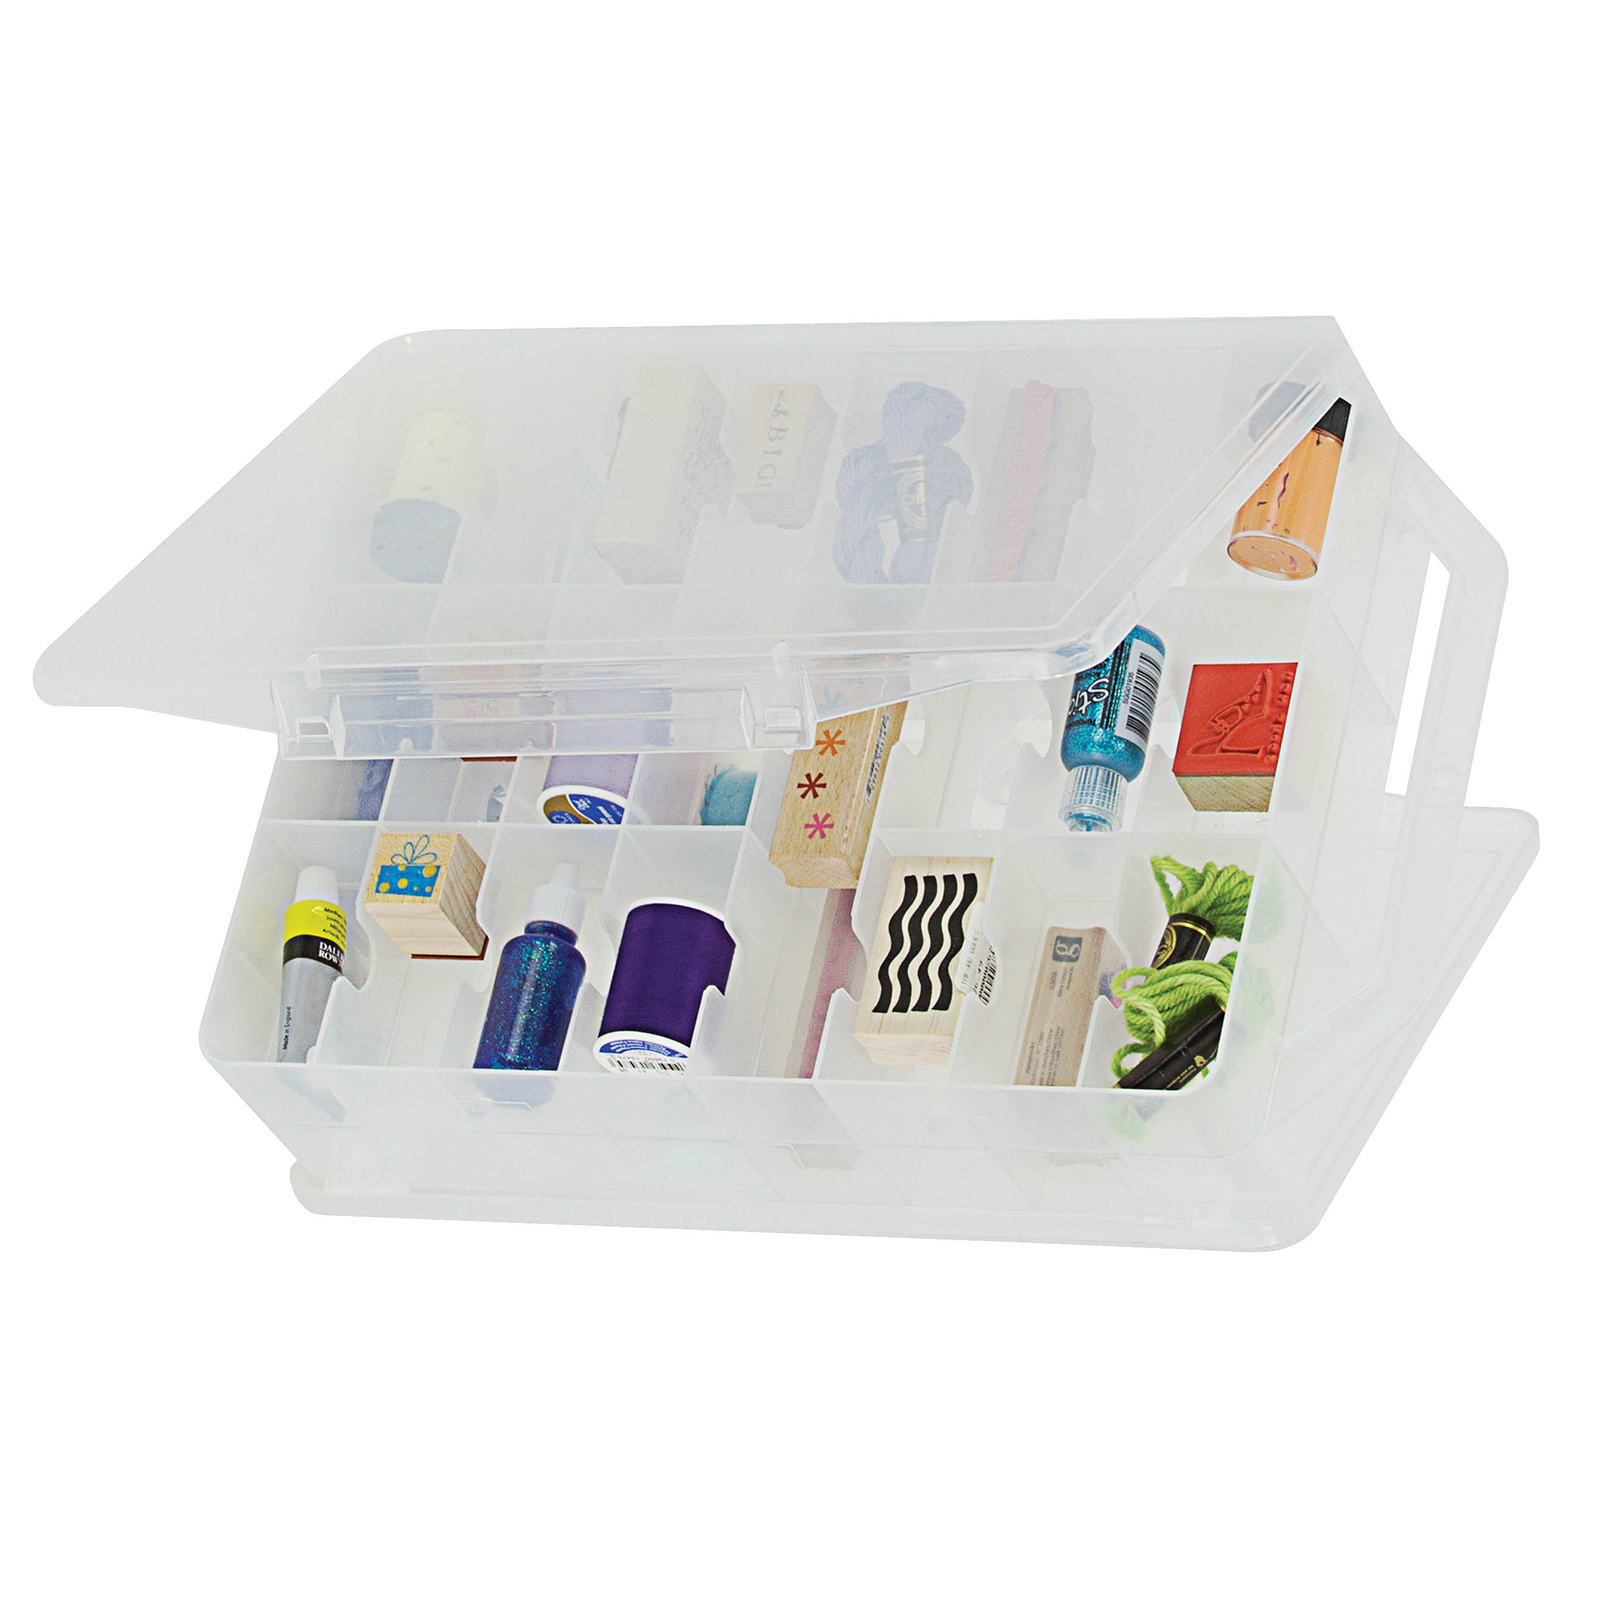 Double Sided Thread & Parts Box by Creative options in Clear | Michaels